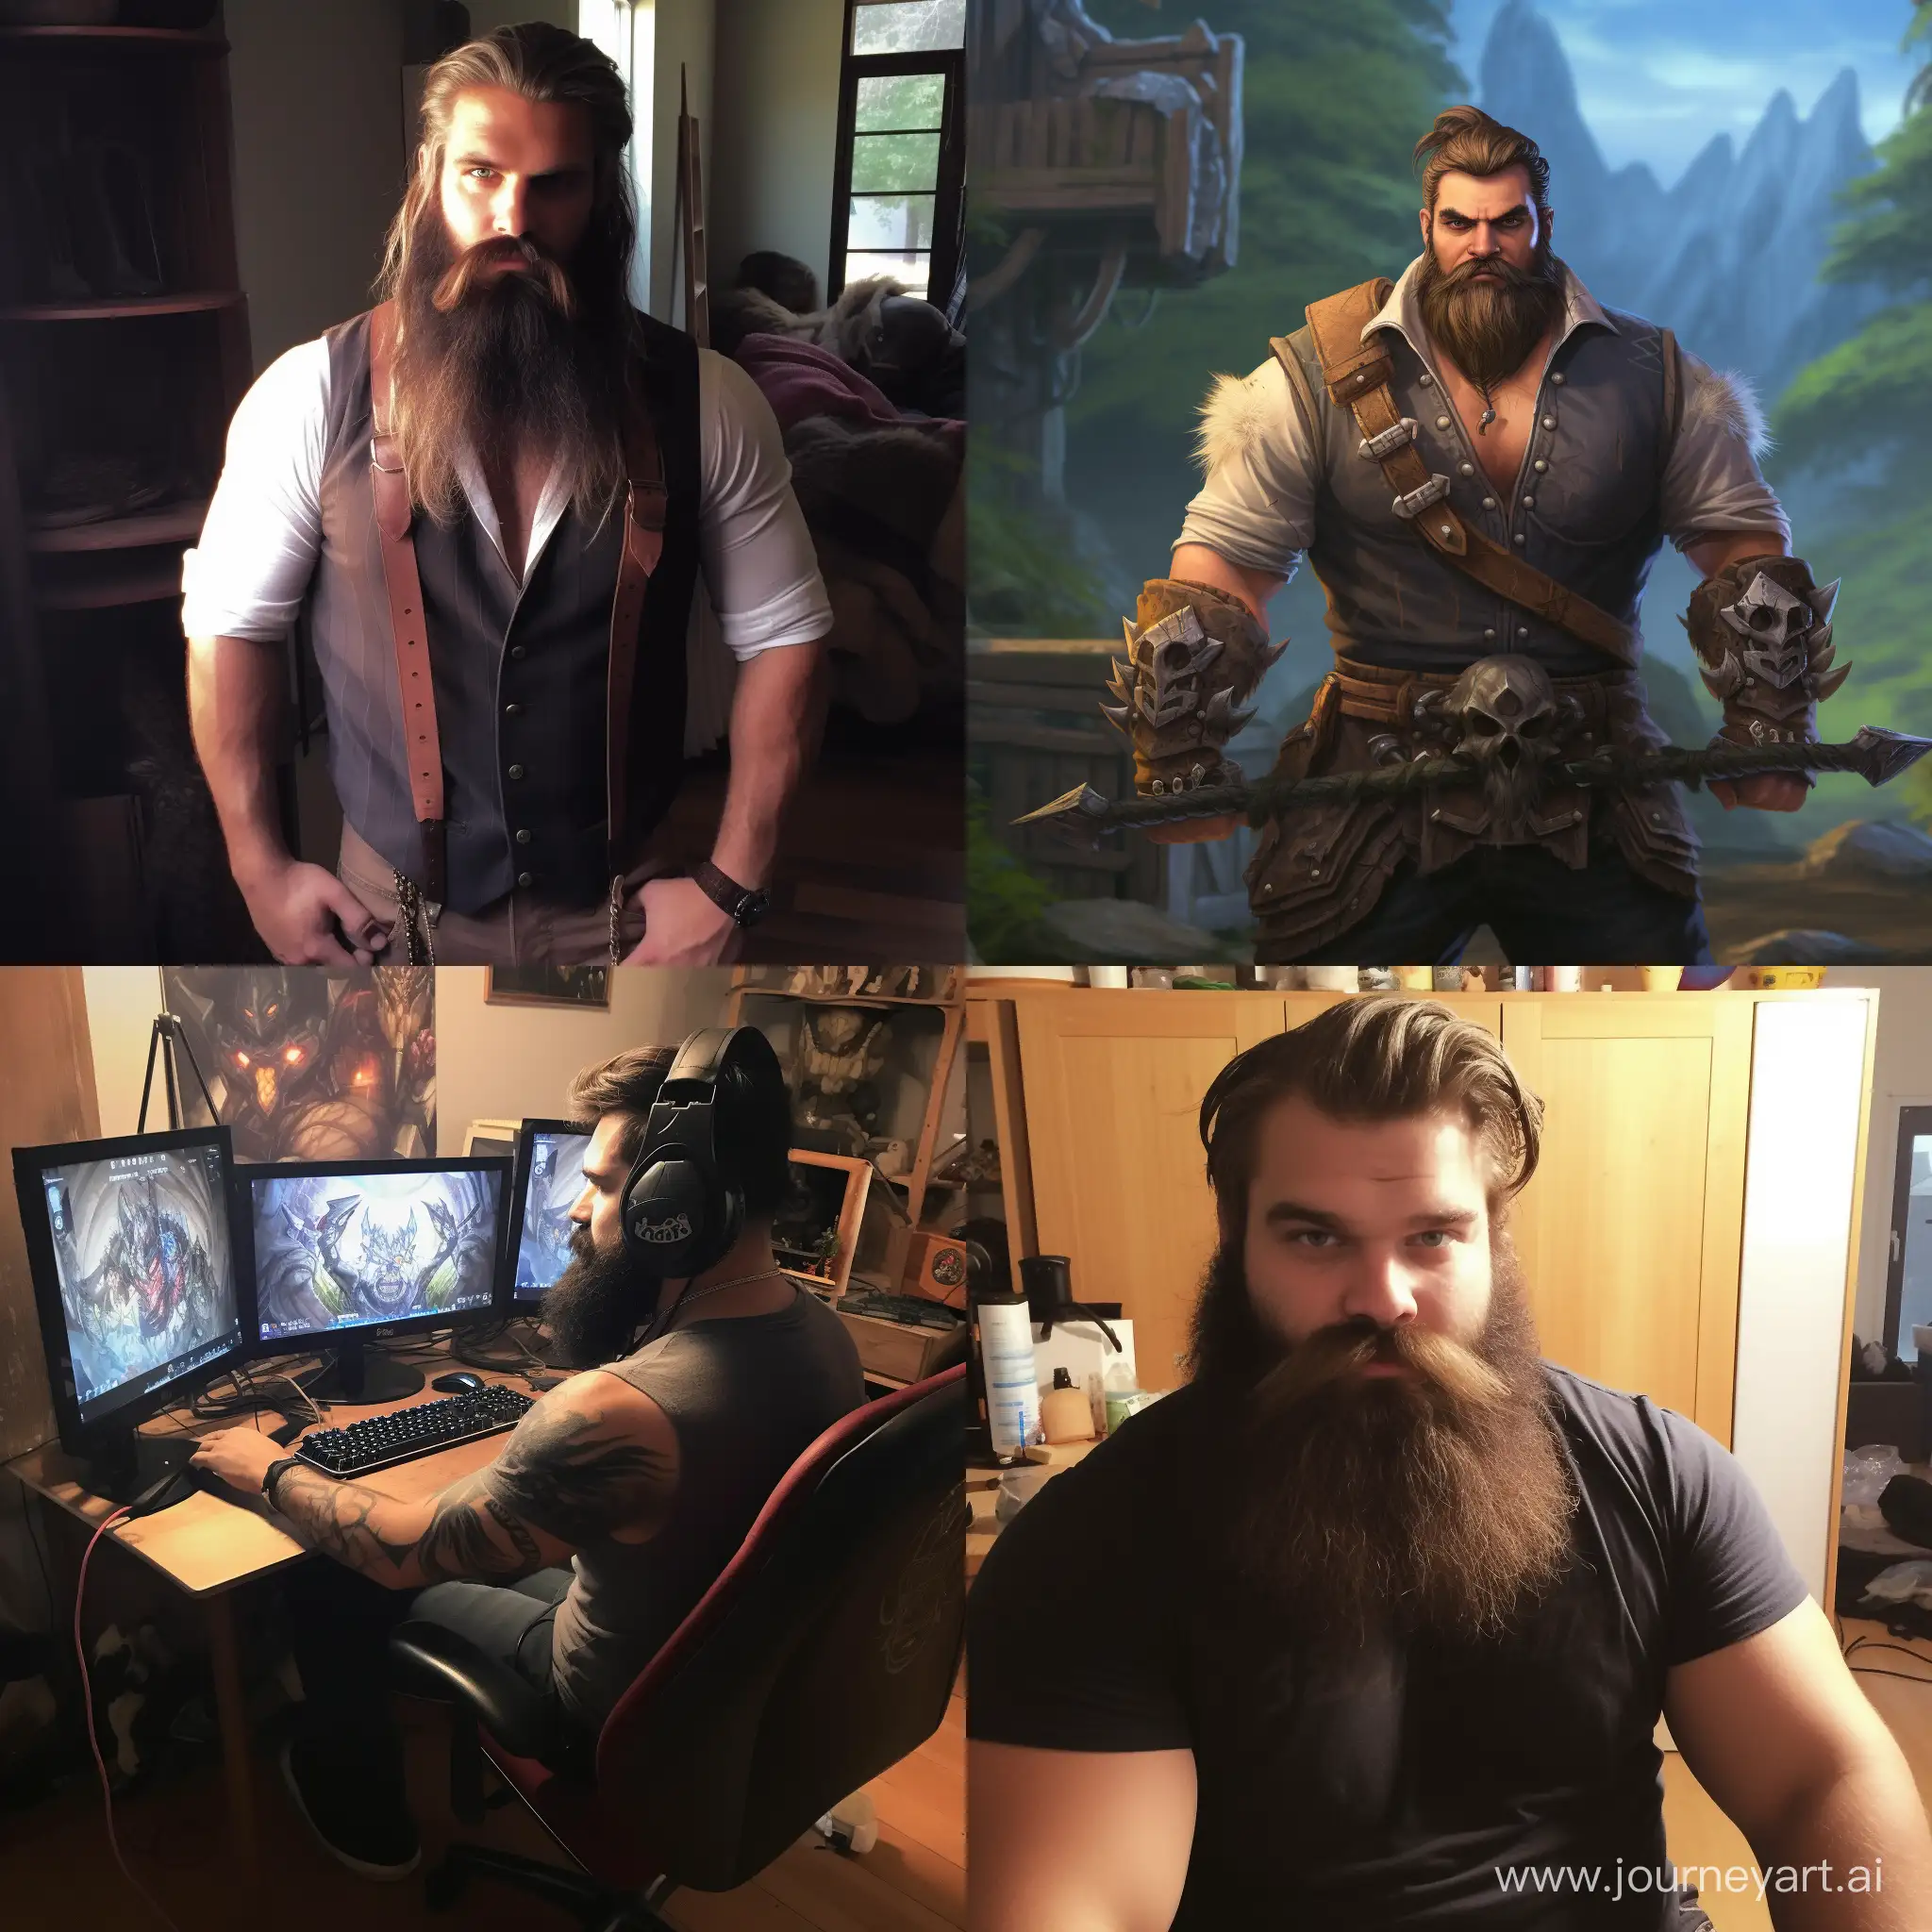 A bearded 30-year-old man with shitty pants is playing league of legends